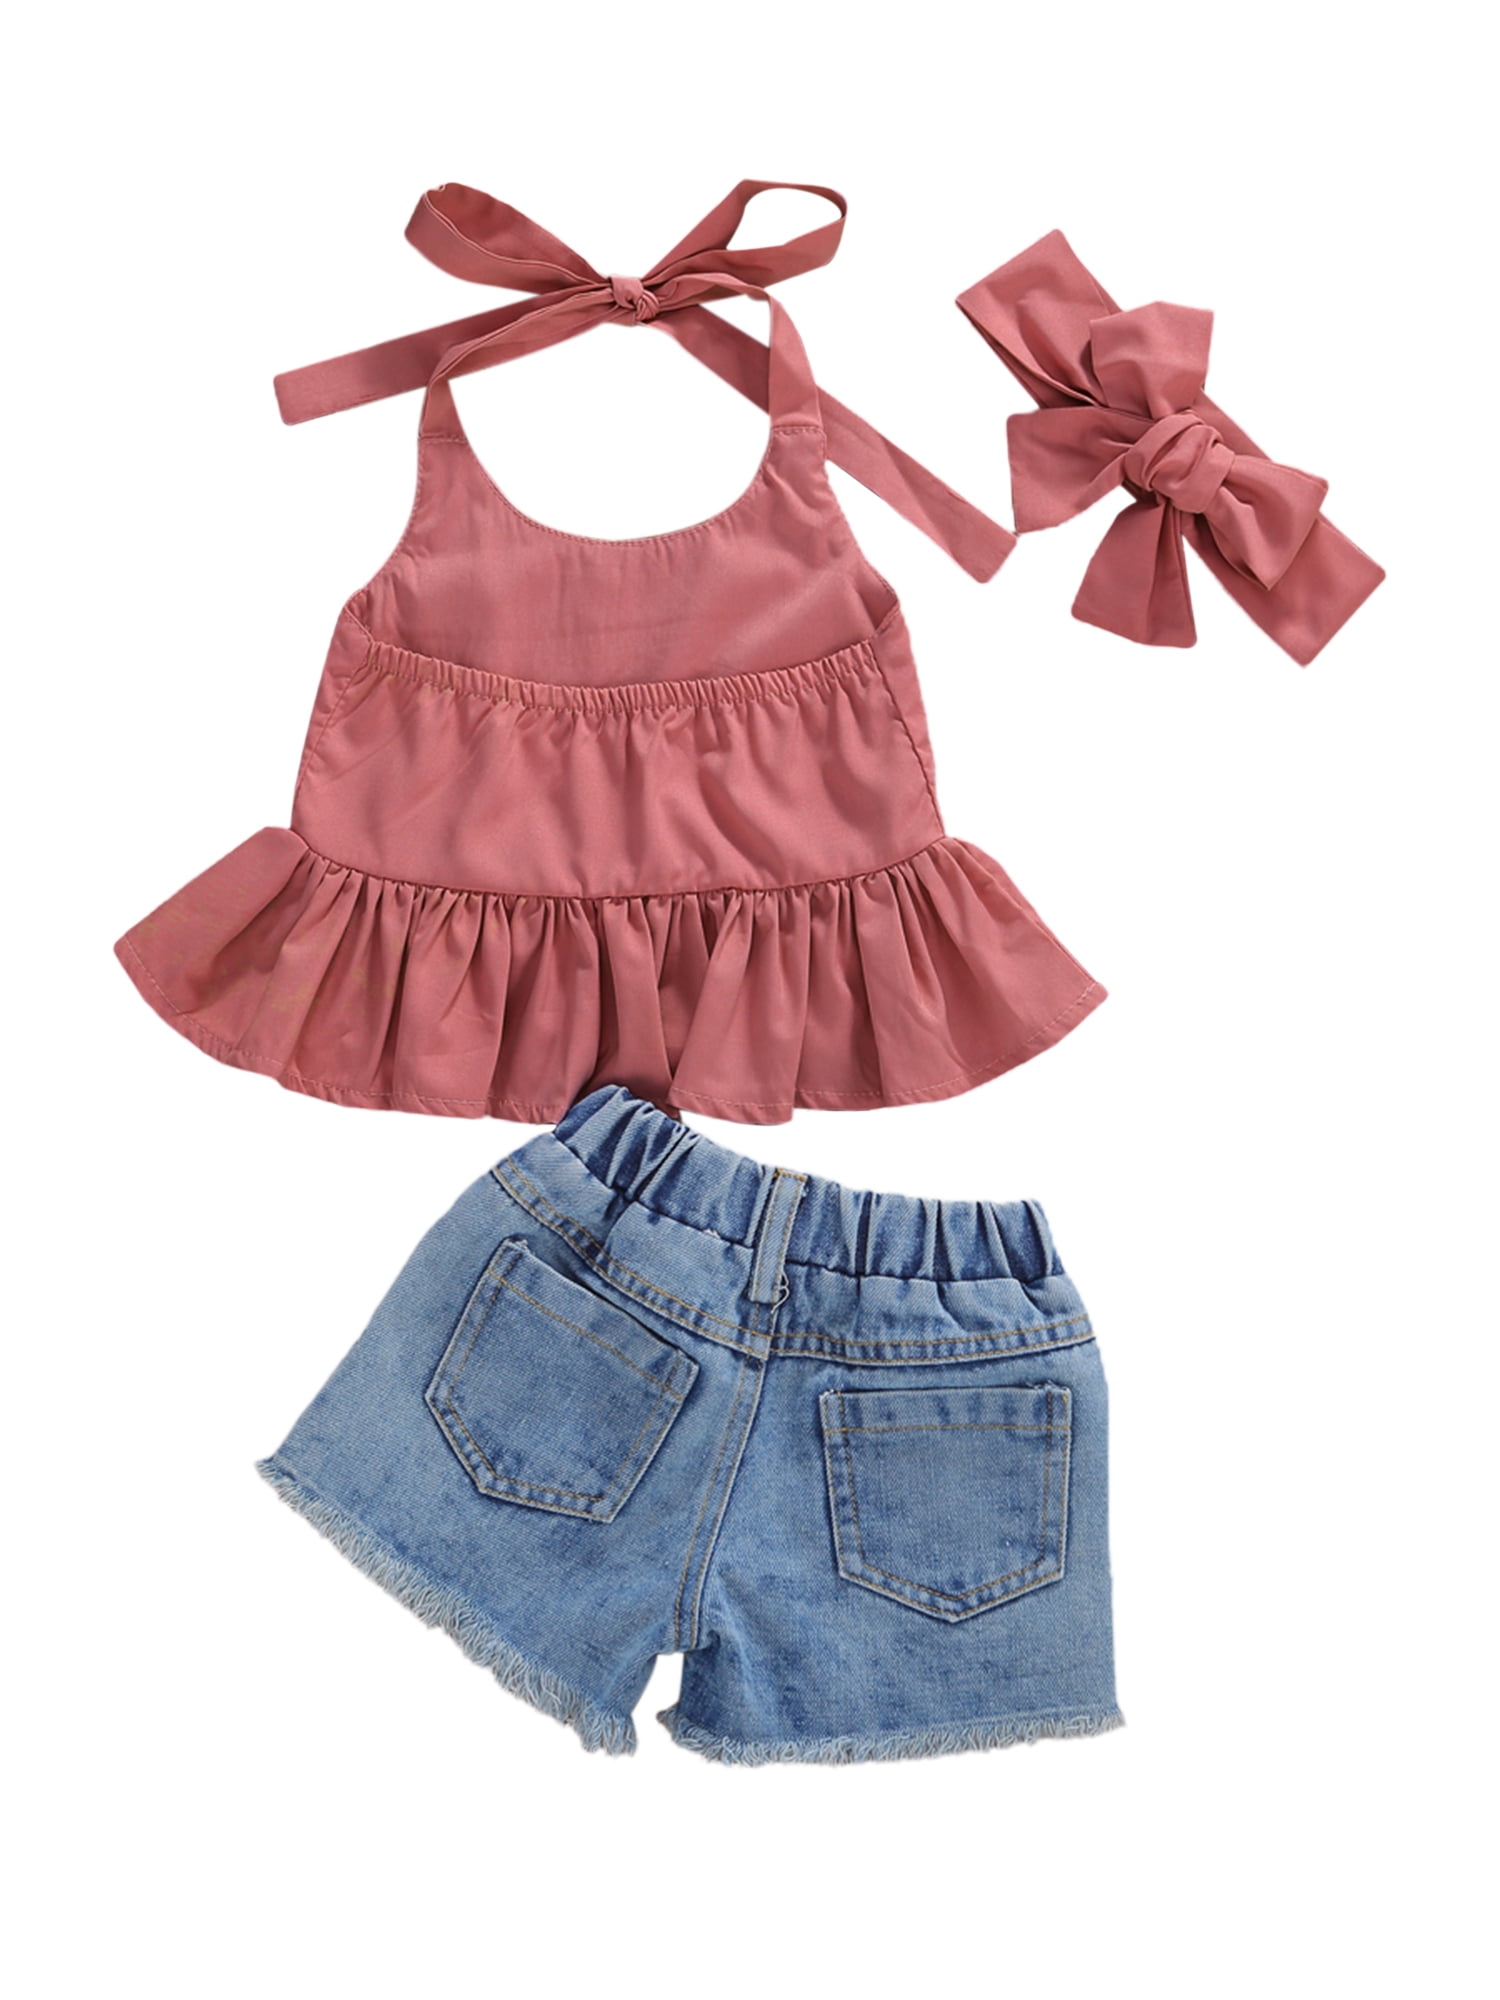 IV. Tips for Choosing the Perfect Baby Denim Clothing